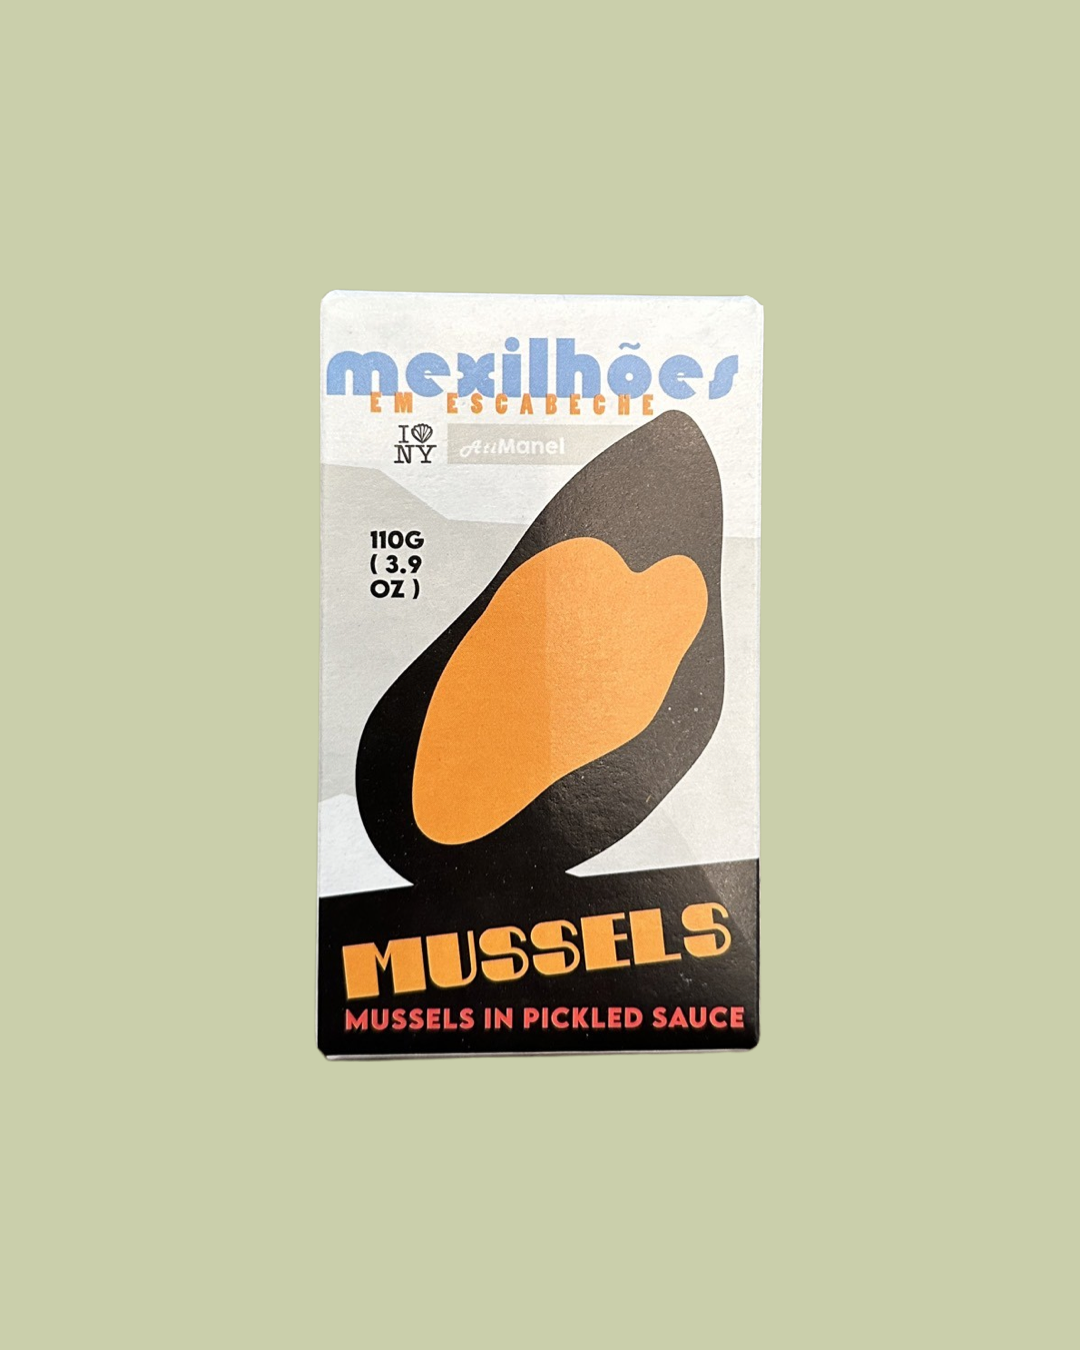 Mussels in Pickled Sauce